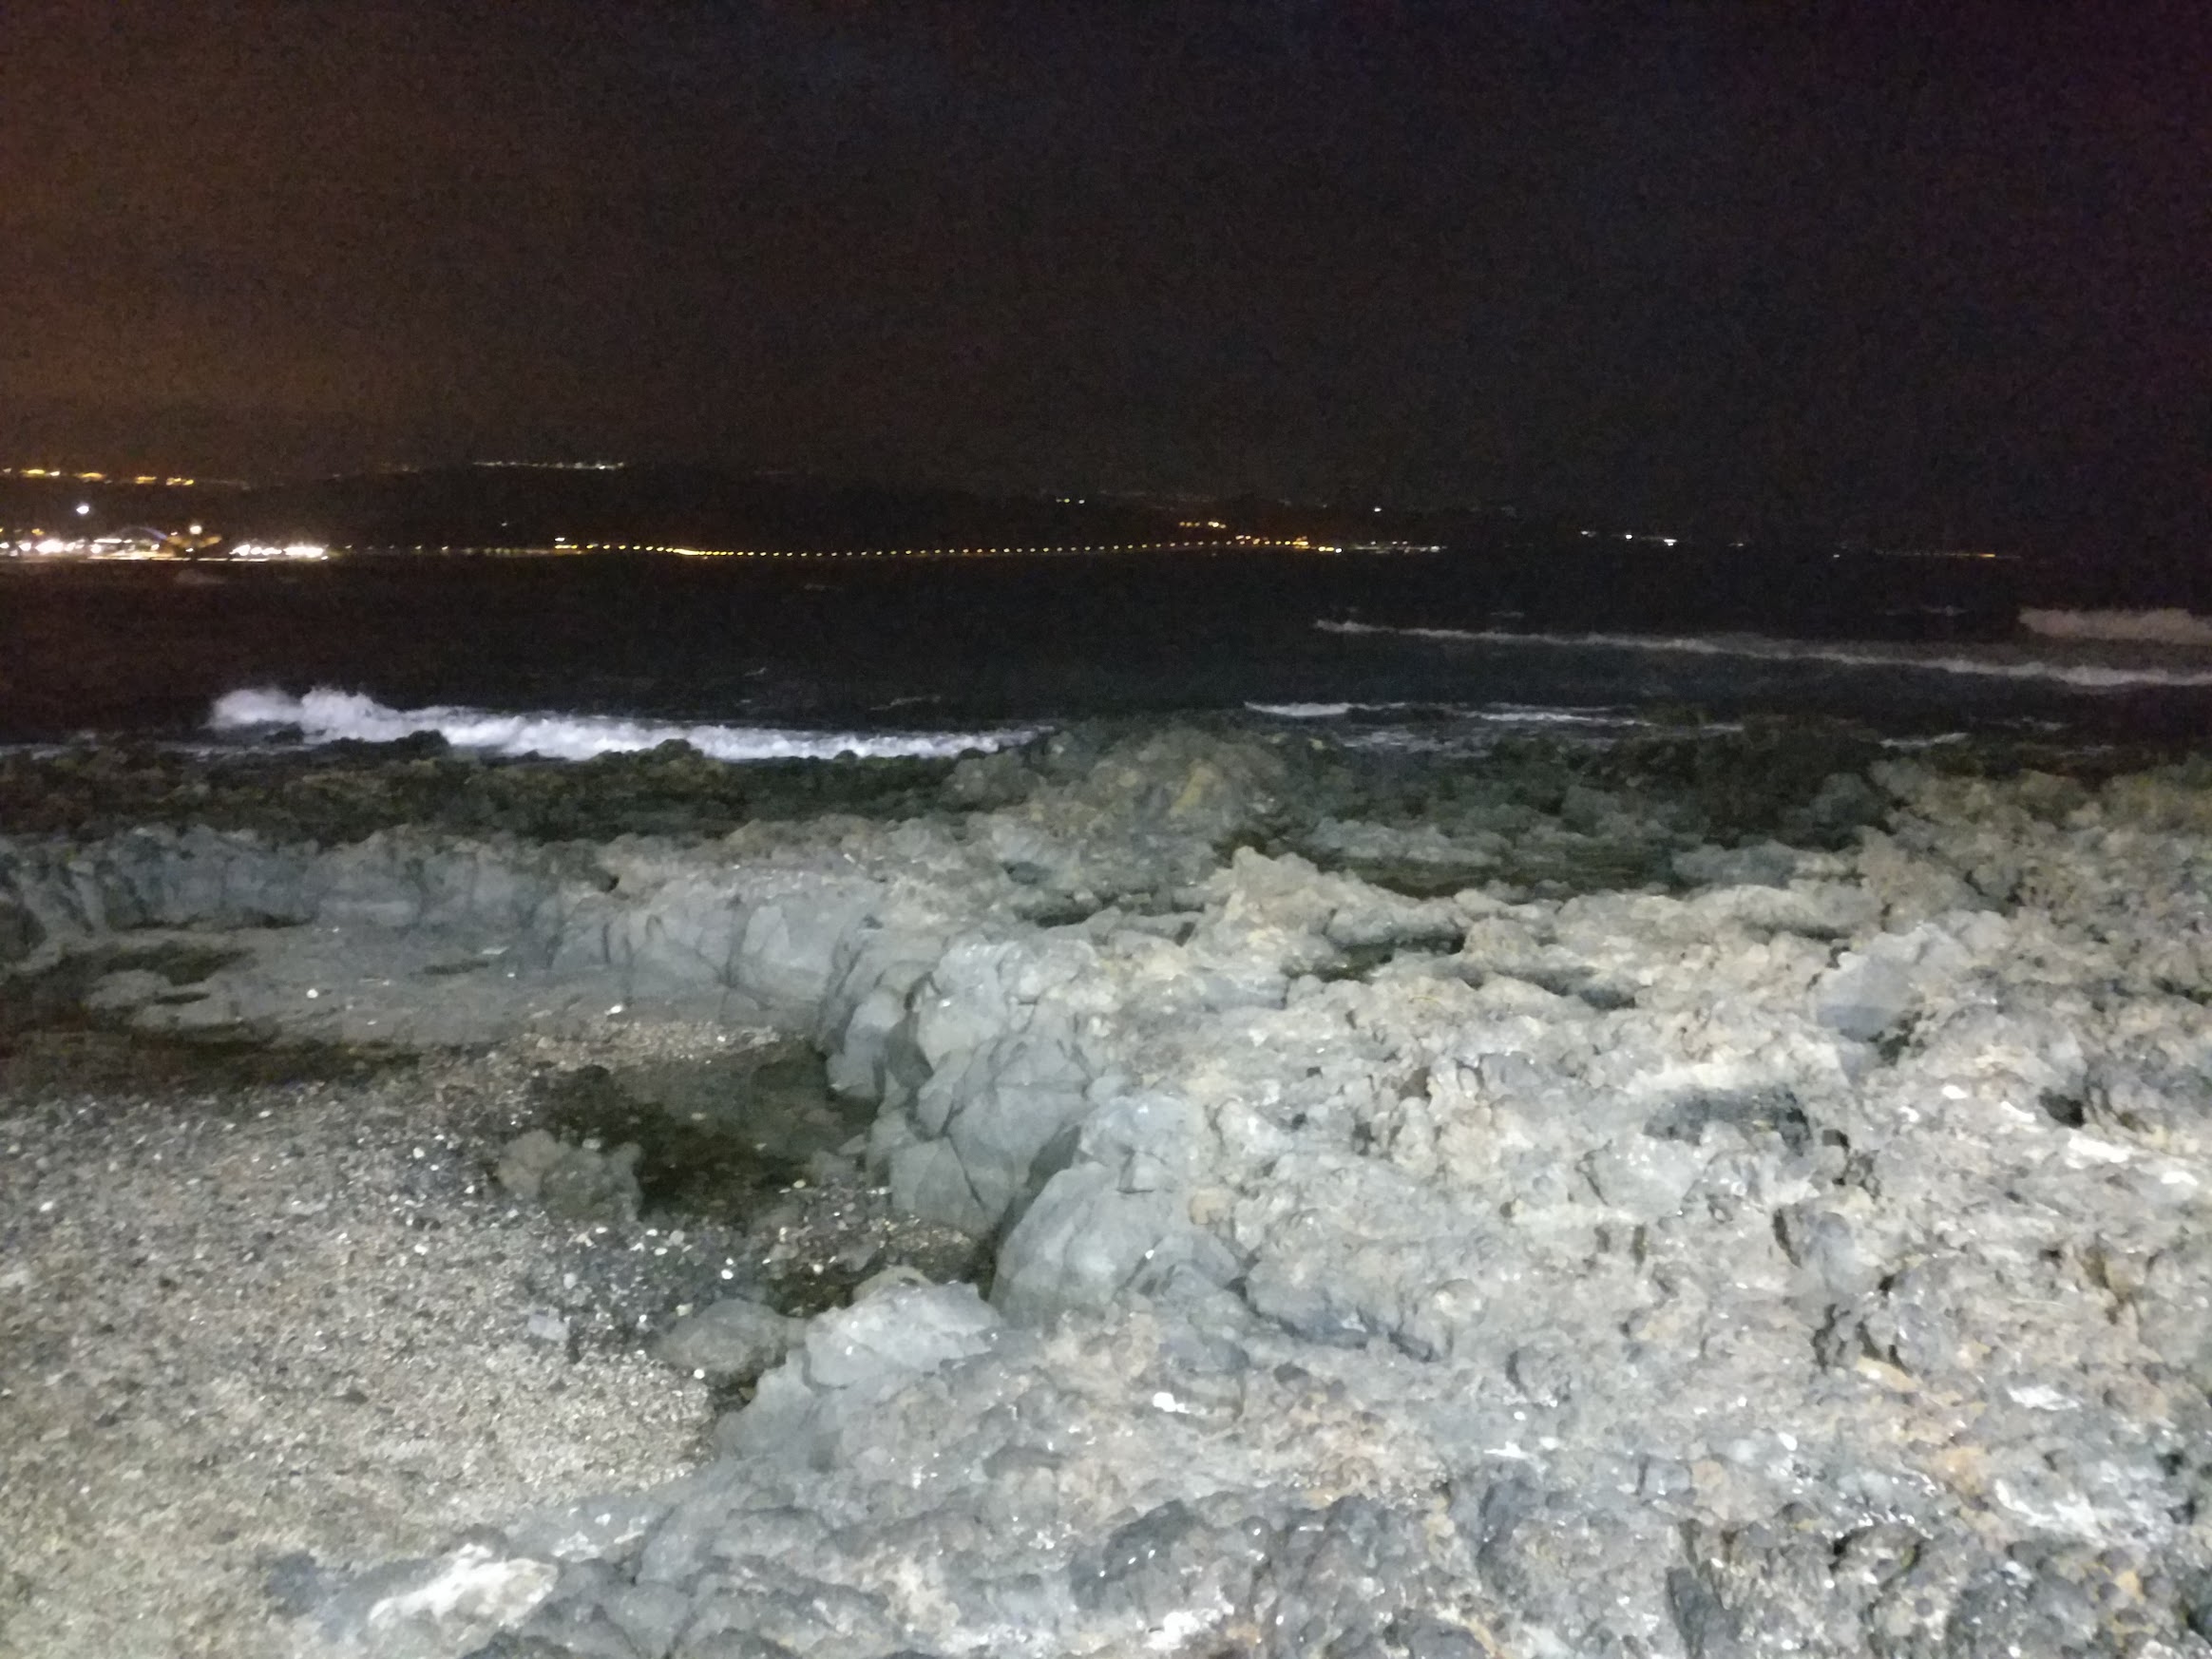 A view of some rocks in the ocean at night